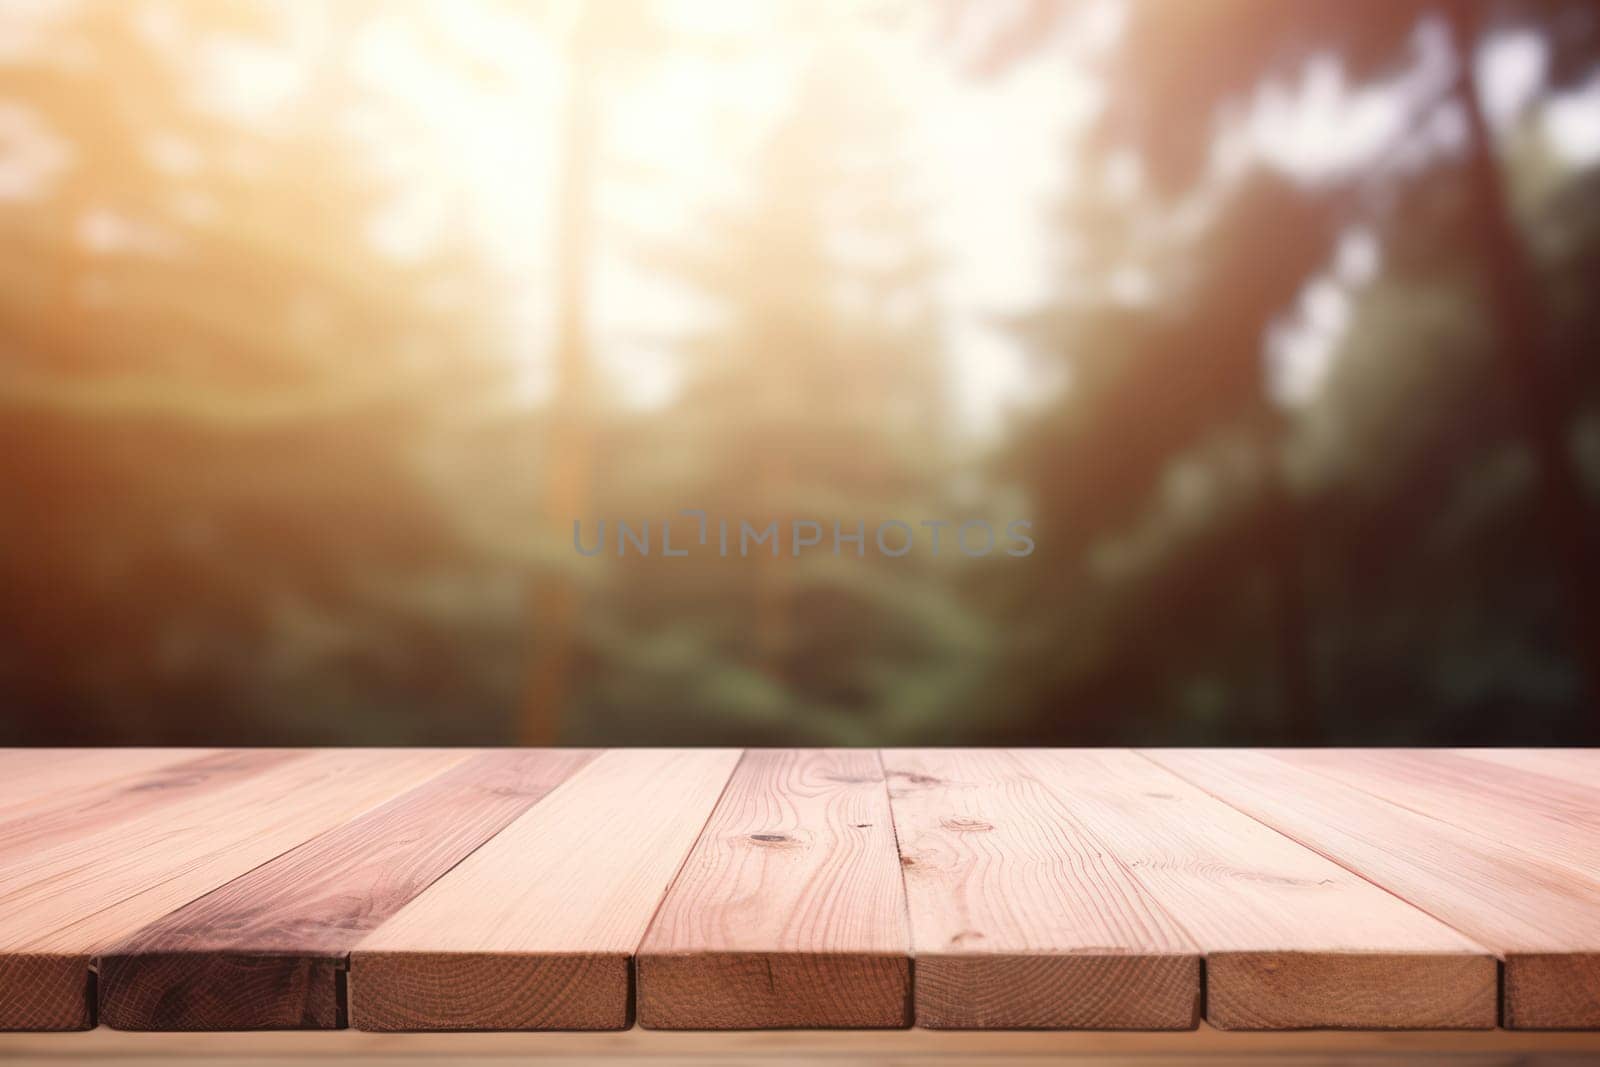 Nature's Embrace: A Rustic Wooden Table in a Sunlit Garden, Showcasing the Beauty of an Empty Top, Surrounded by Greenery and Abstract Bokeh". by Vichizh